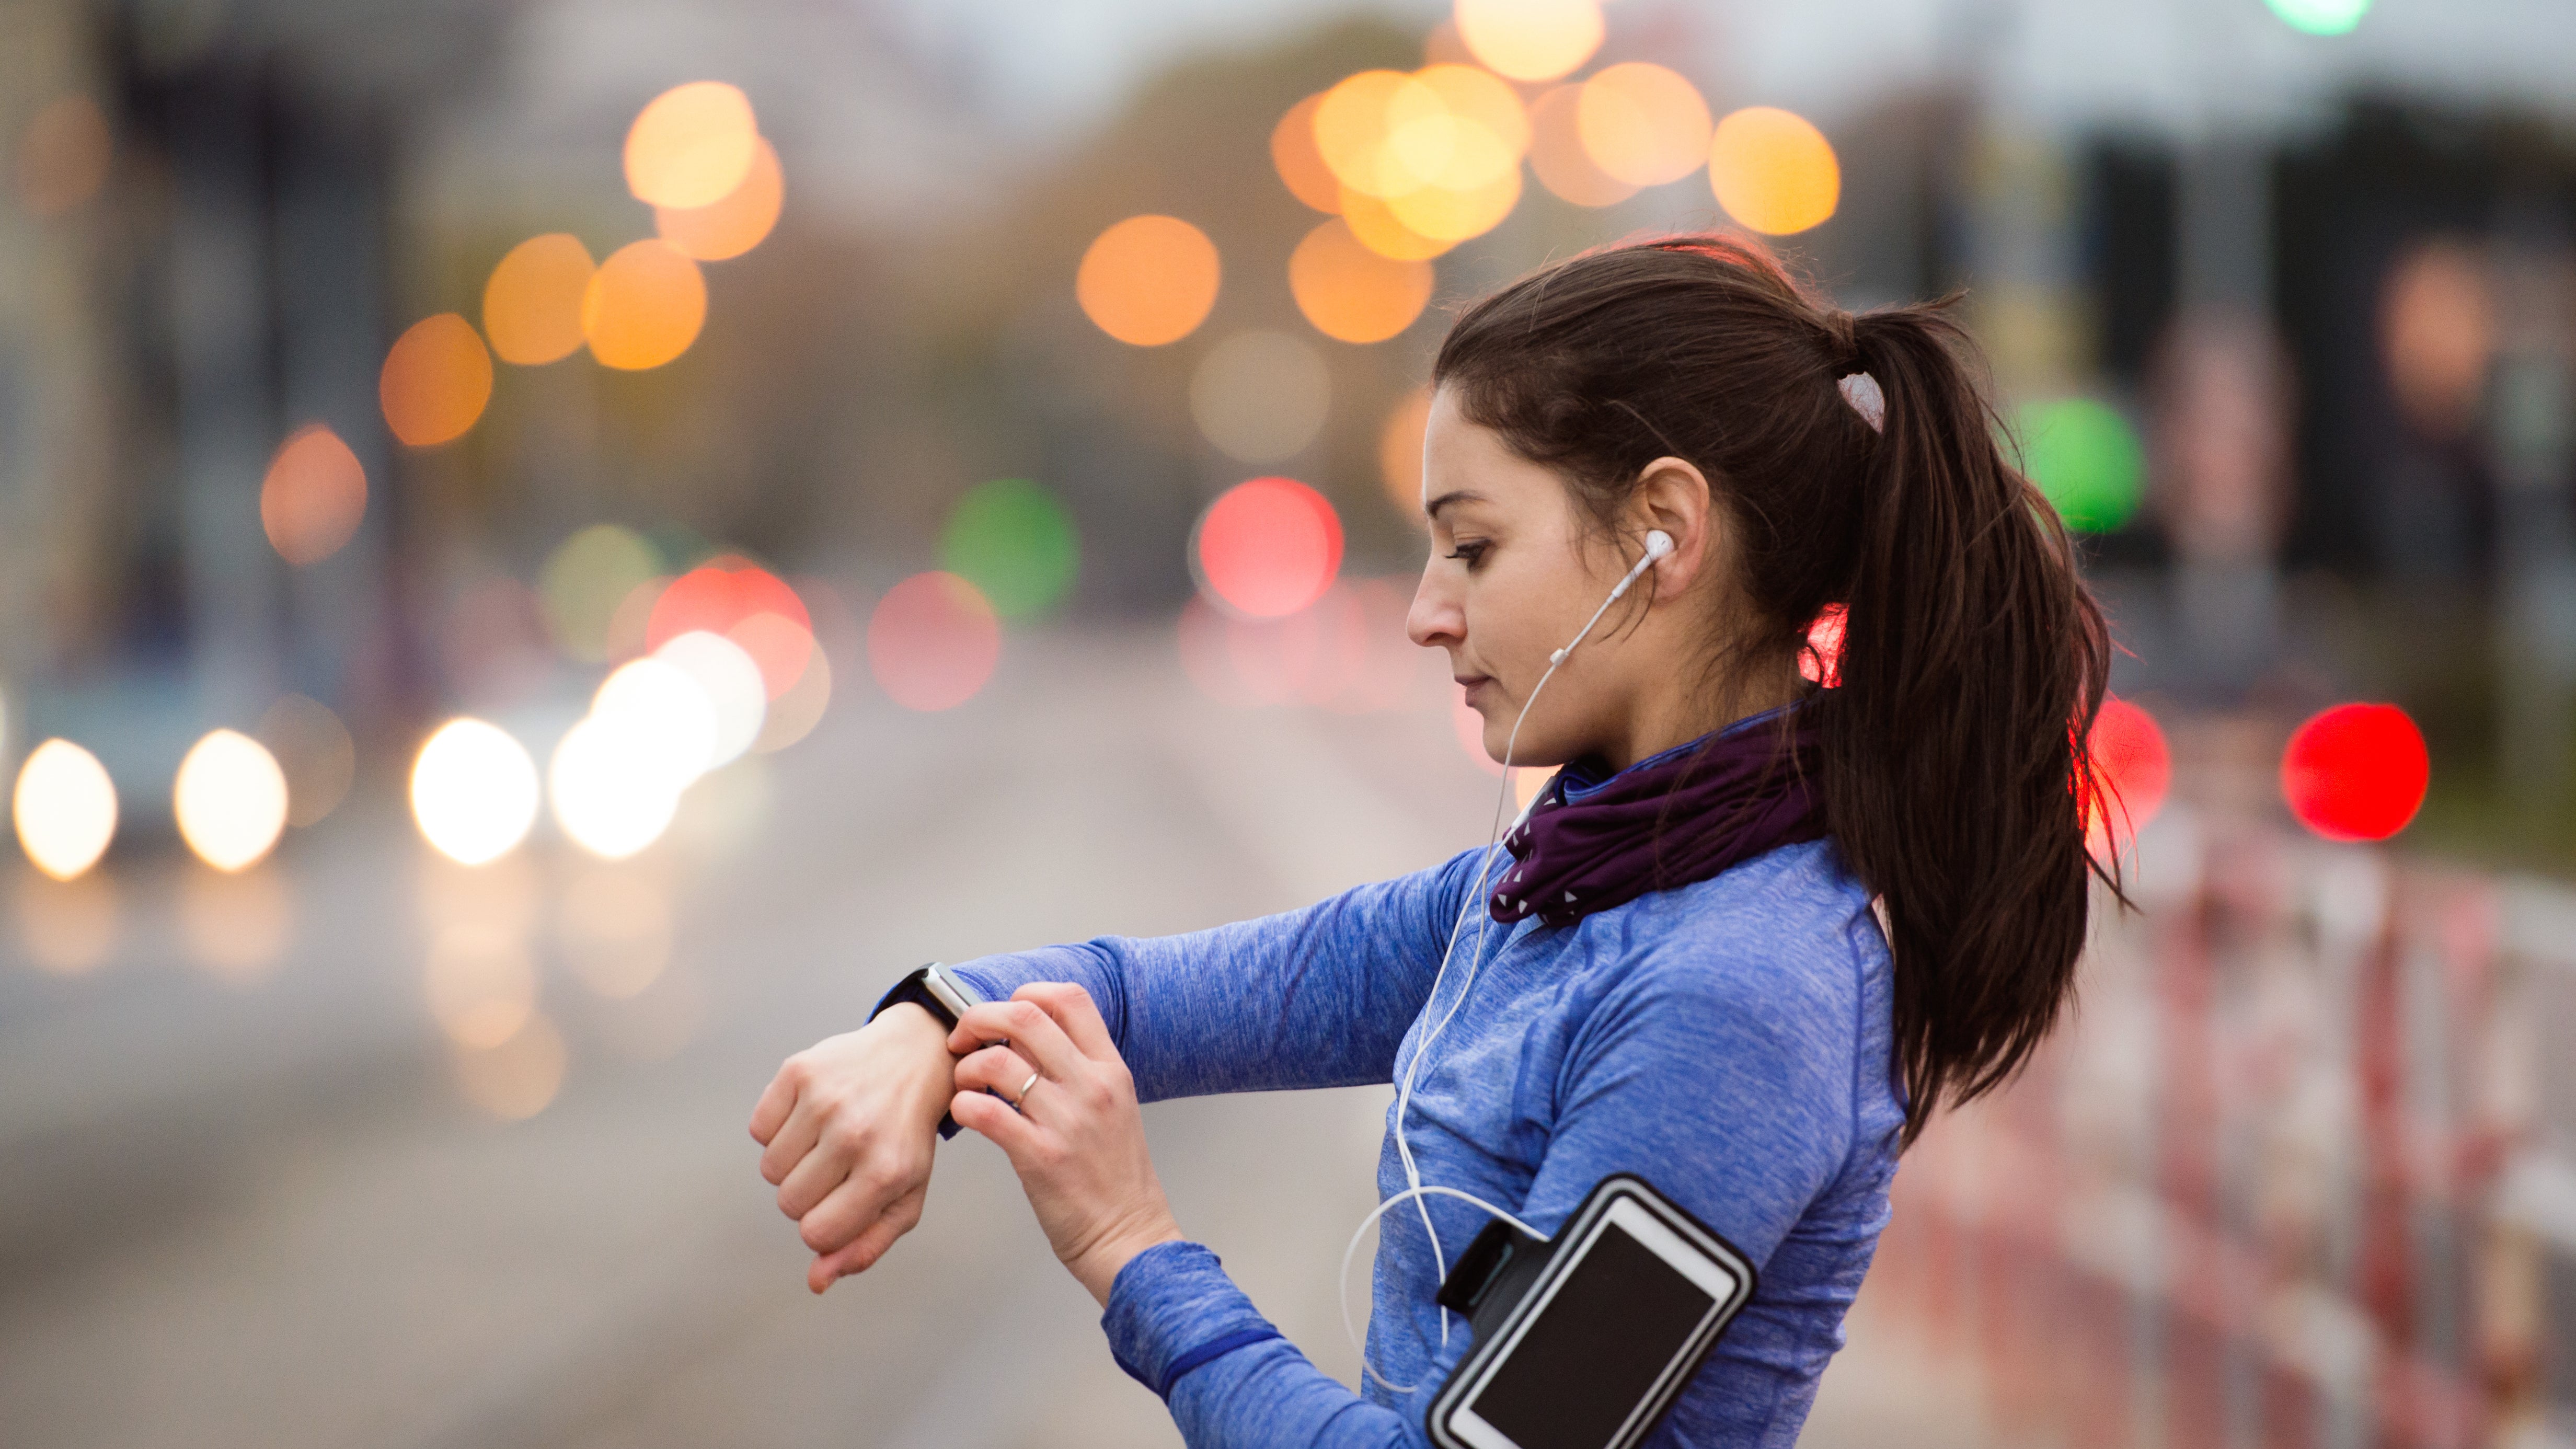 The Future Is Now: Wearables for Insurance Risk Assessment